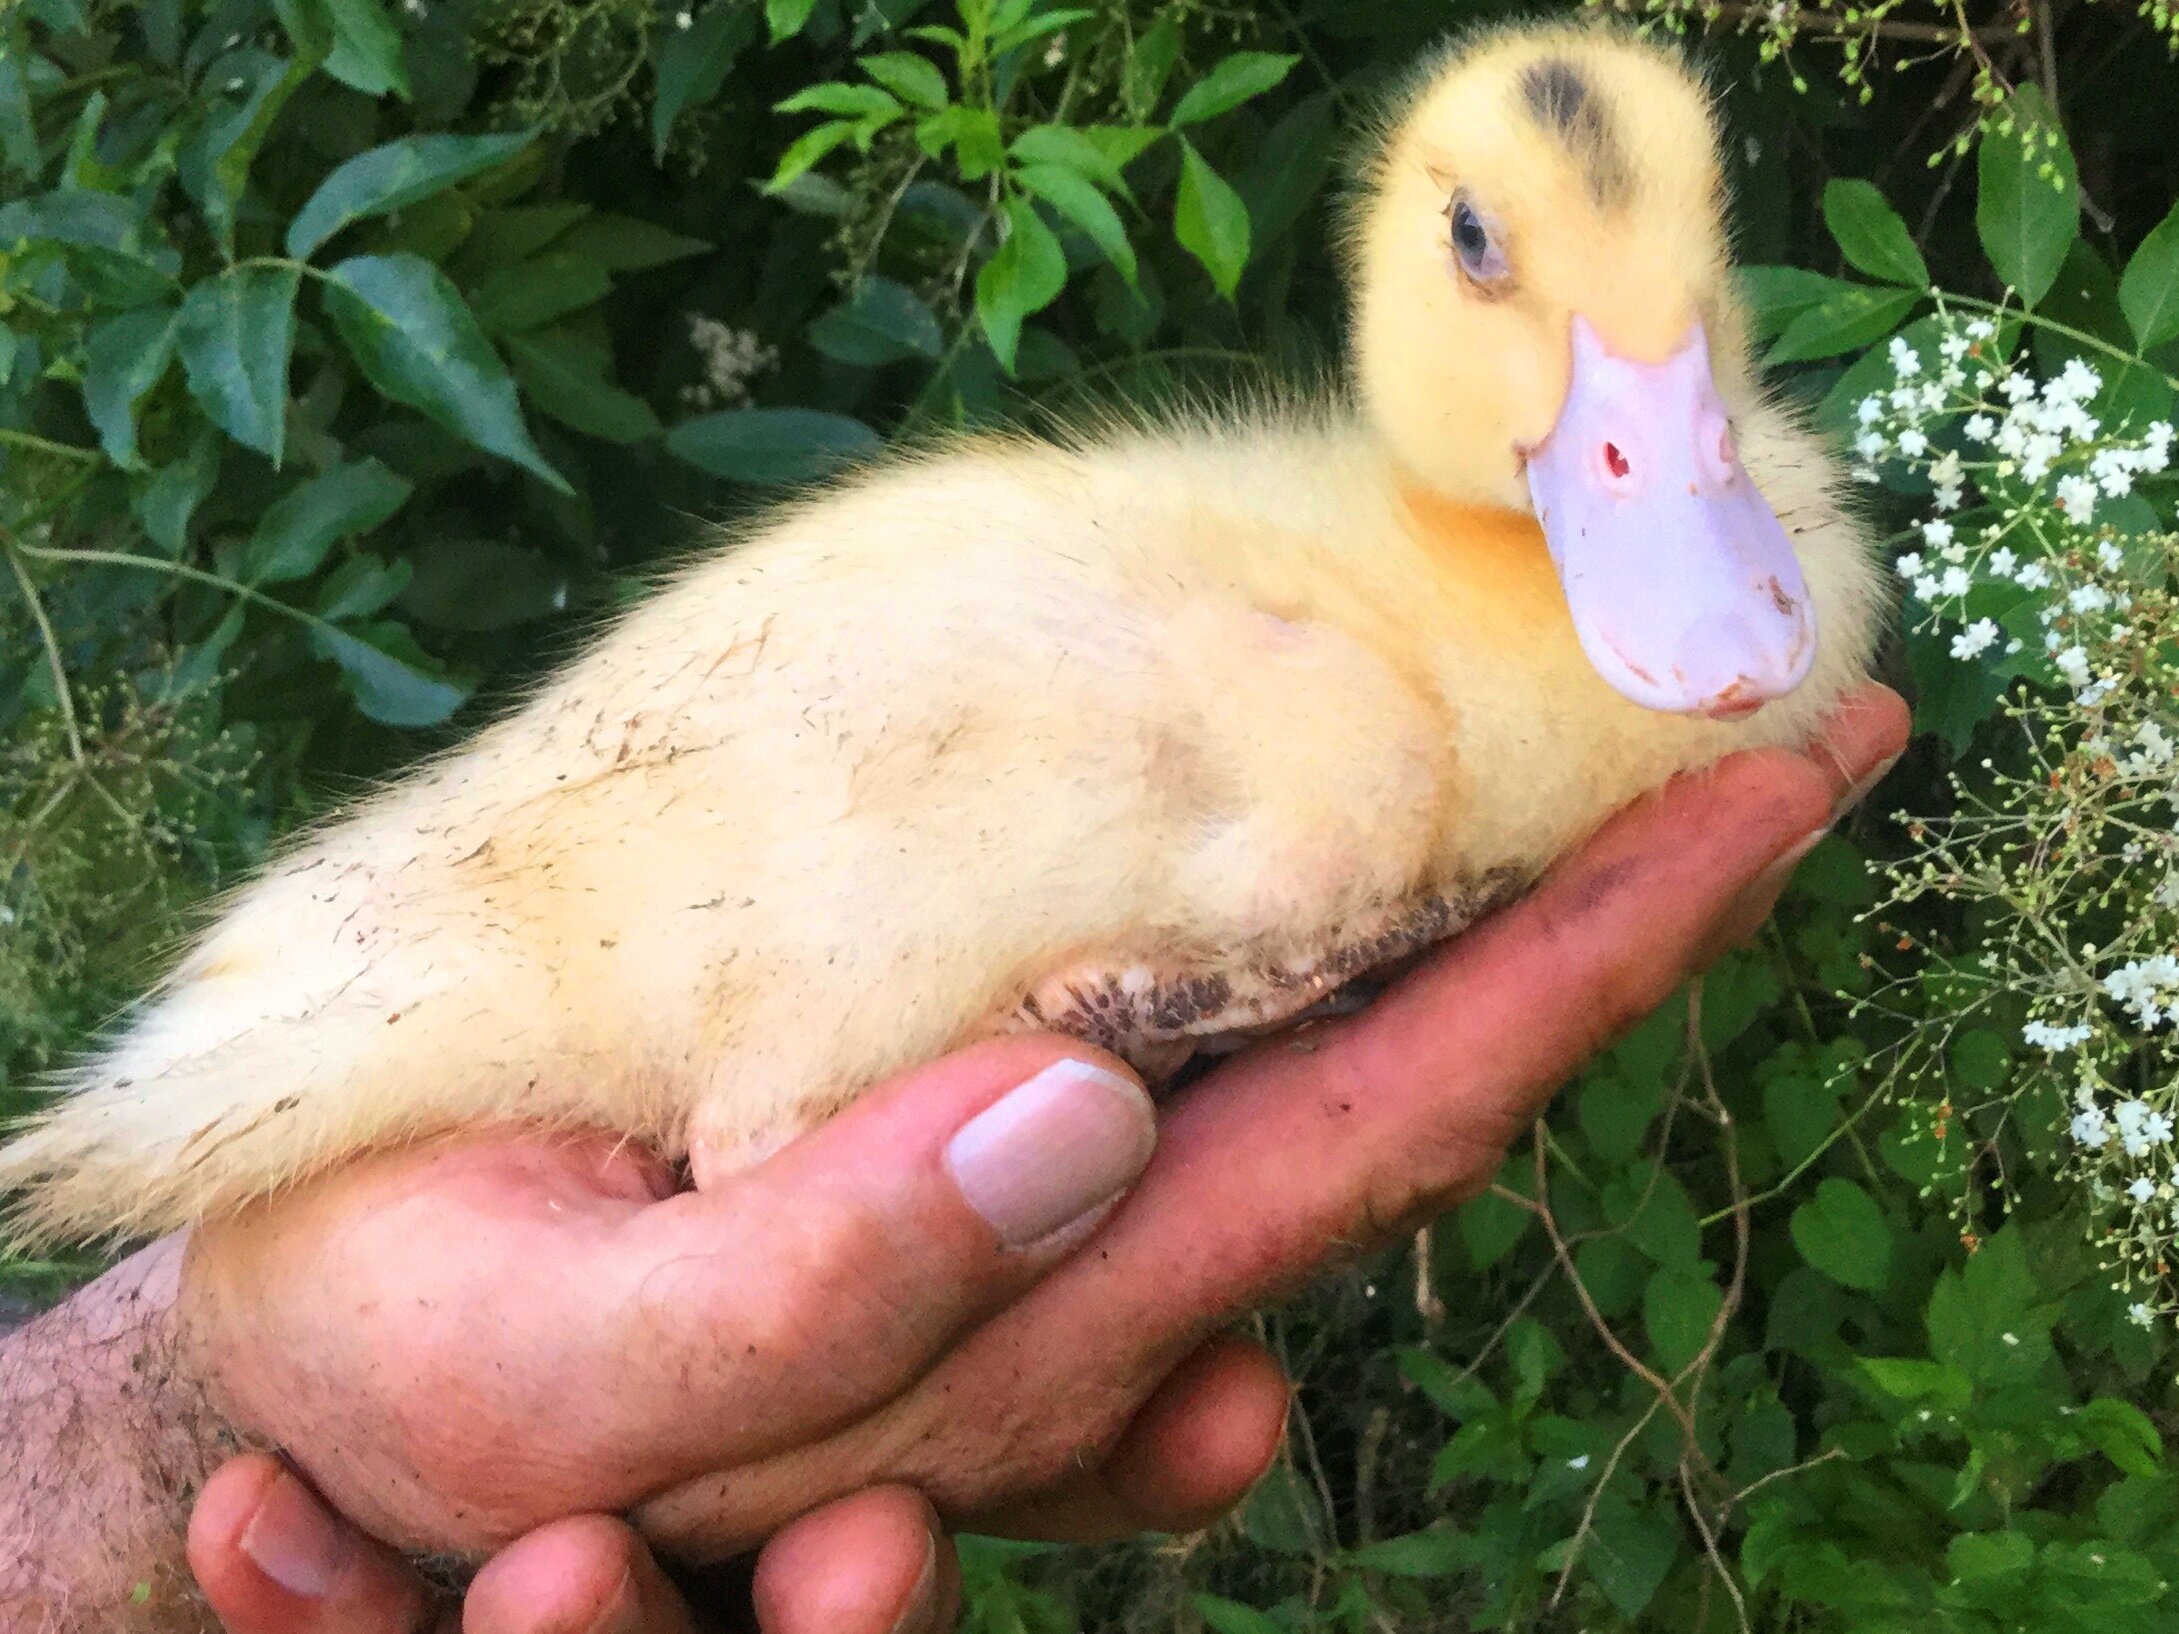 Baby duck being held in a hand